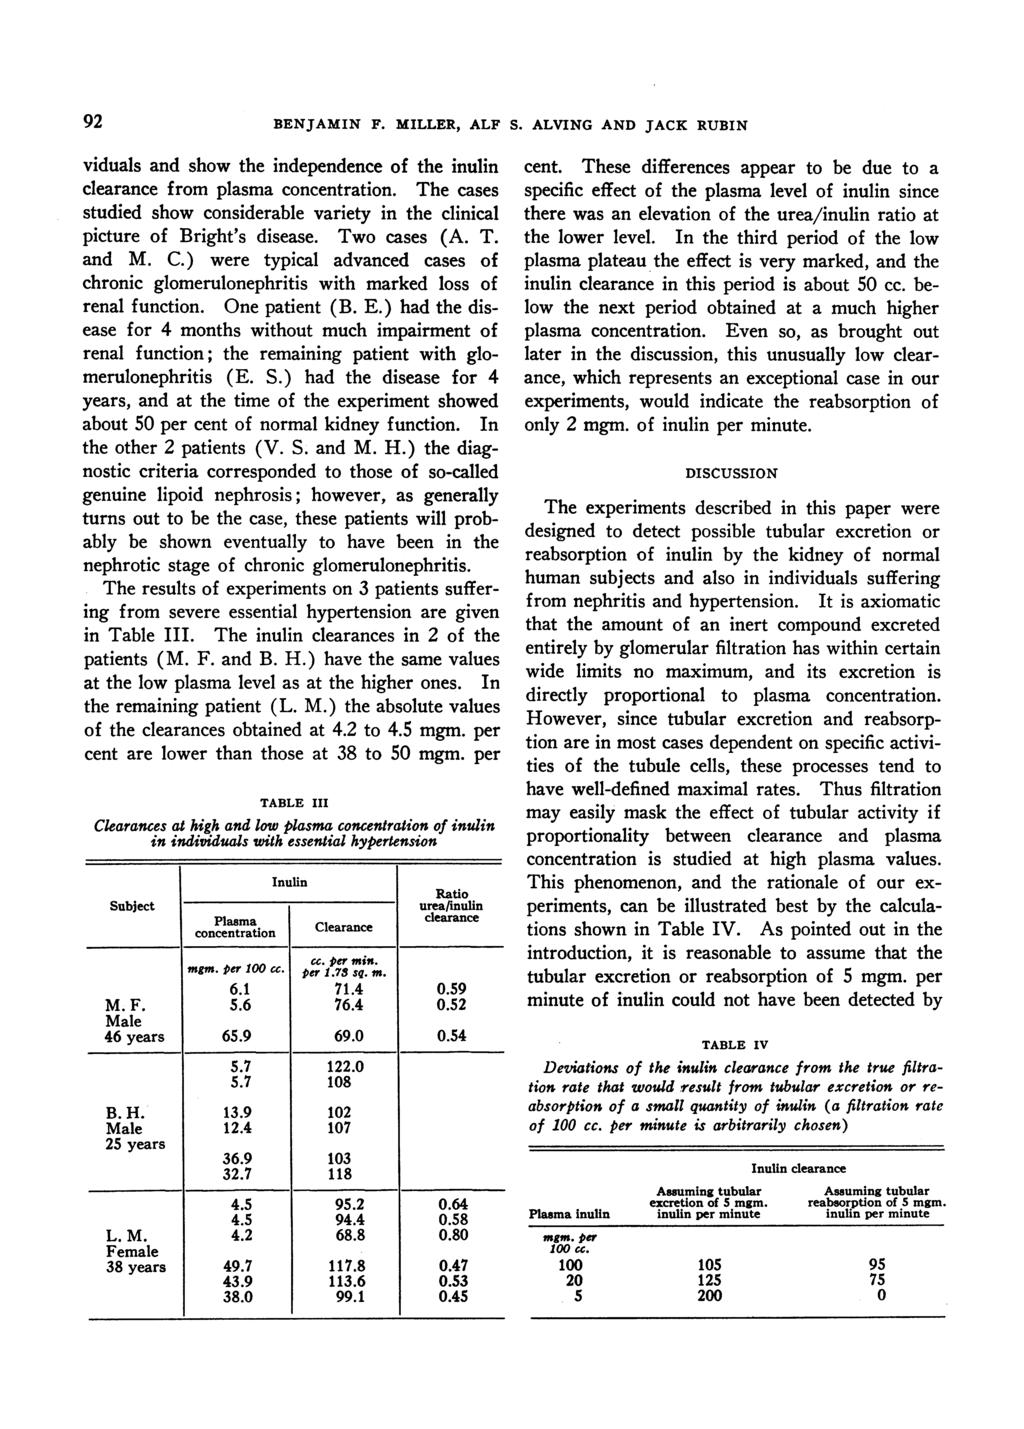 92 BENJAMIN F. MILLER, ALF S. ALVING AND JACK RUBIN viduals and show the independence of the inulin clearance from plasma concentration.